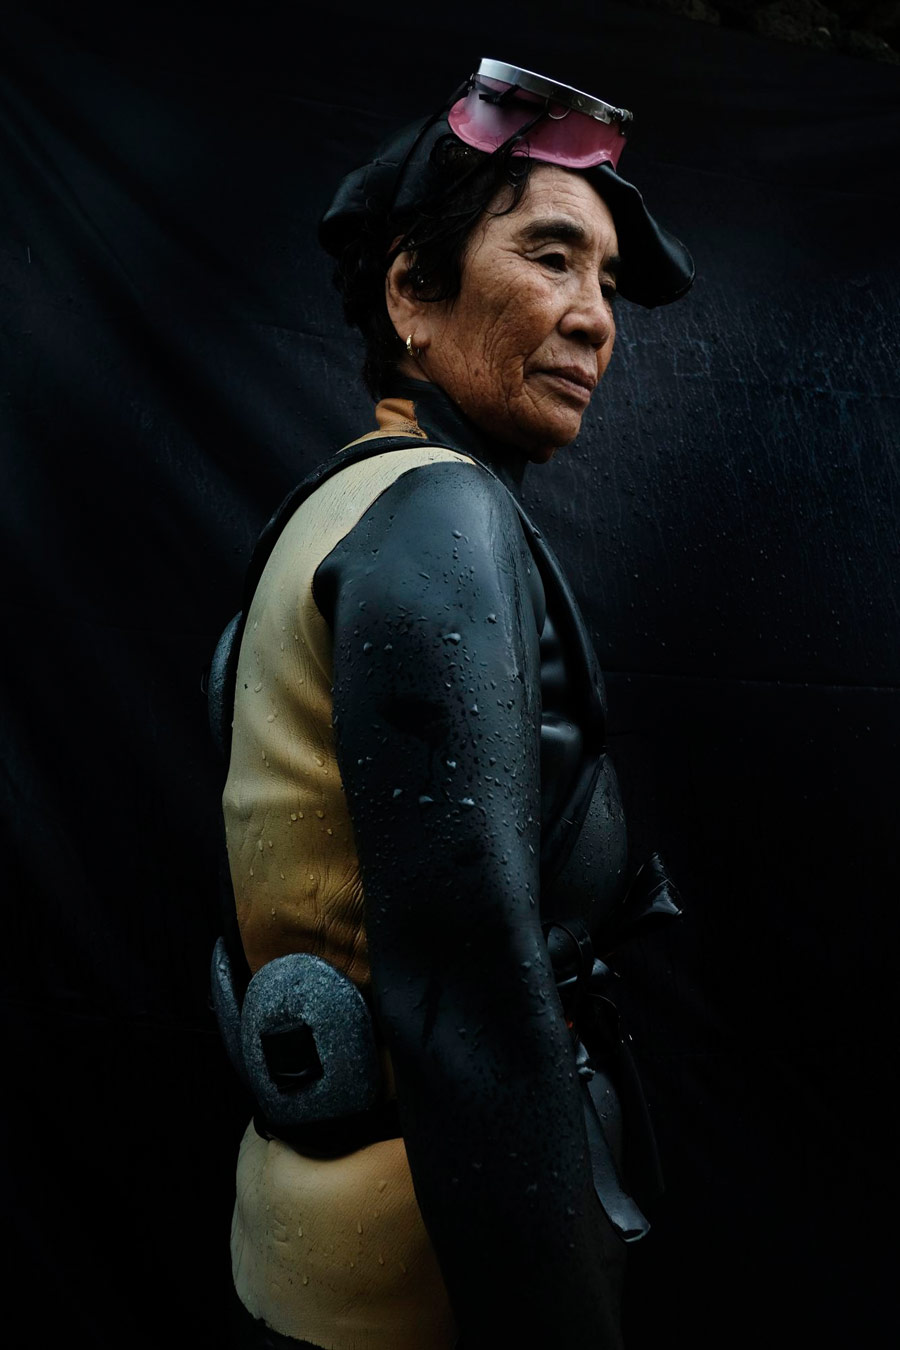 Professional Submission : Portraits, The Last Lady Divers, © Alain Schroeder, Brussels, Brussels, Belgium, First Place, Perspectives: PhotoPlus Expo Annual Photography Contest